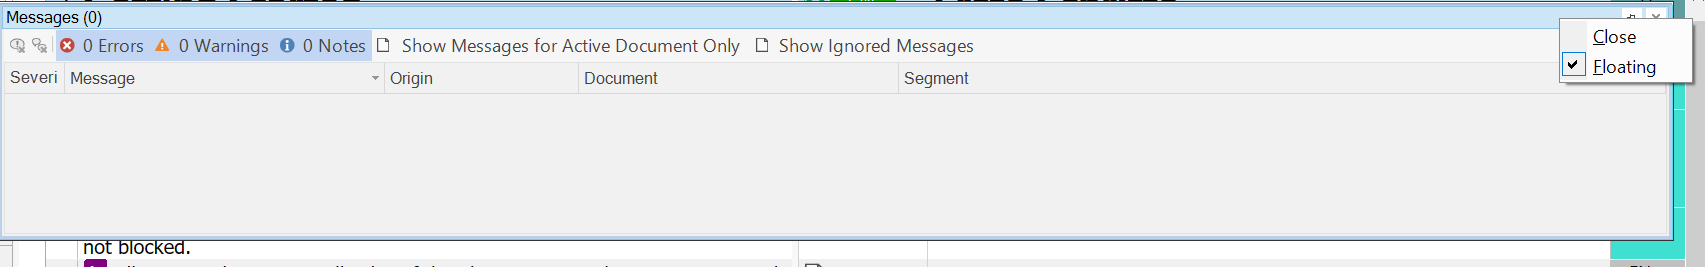 Trados Studio Messages window with zero errors, warnings, and notes. Context menu open with 'Close' and 'Floating' options, 'Floating' is checked.